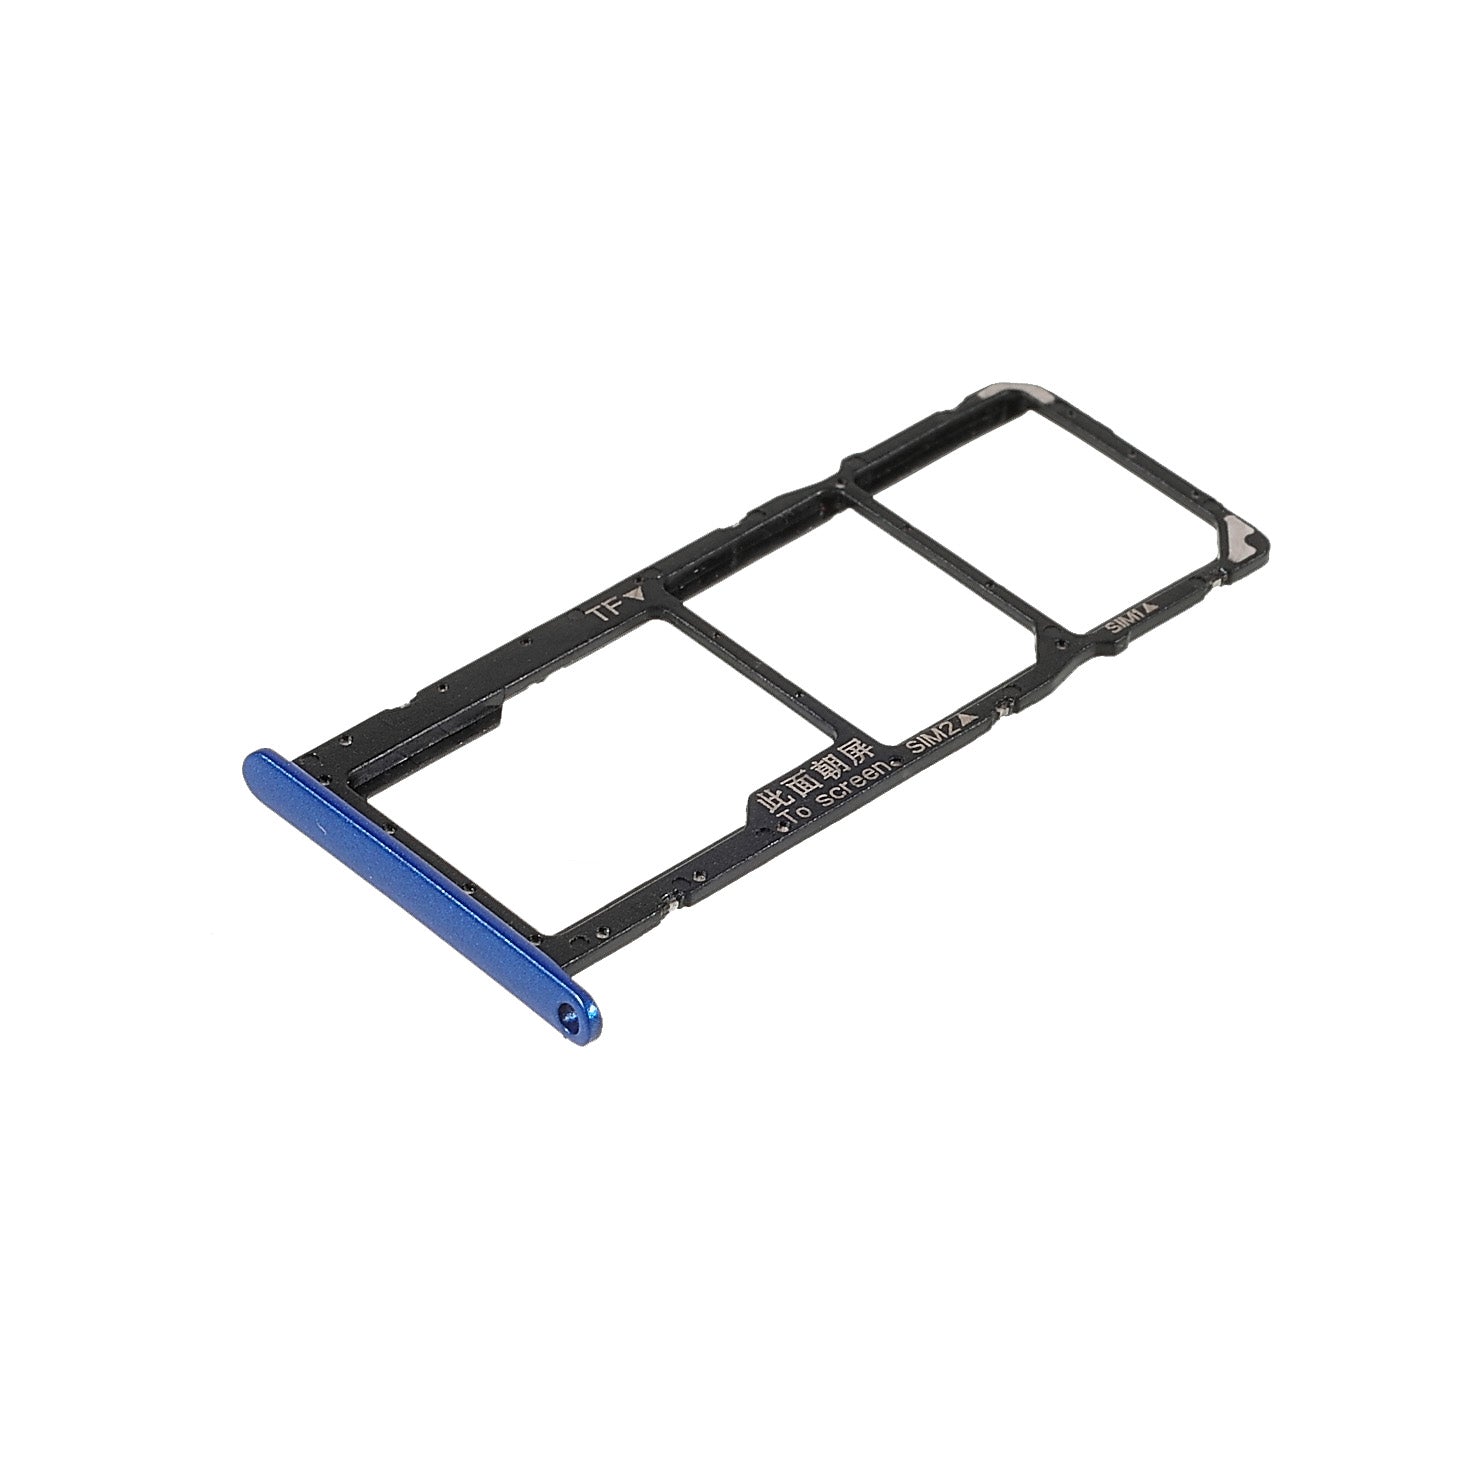 OEM Dual SIM Card + TF Card Tray Holder Replacement (without Logo) for Honor 8X/View 10 Lite - Blue